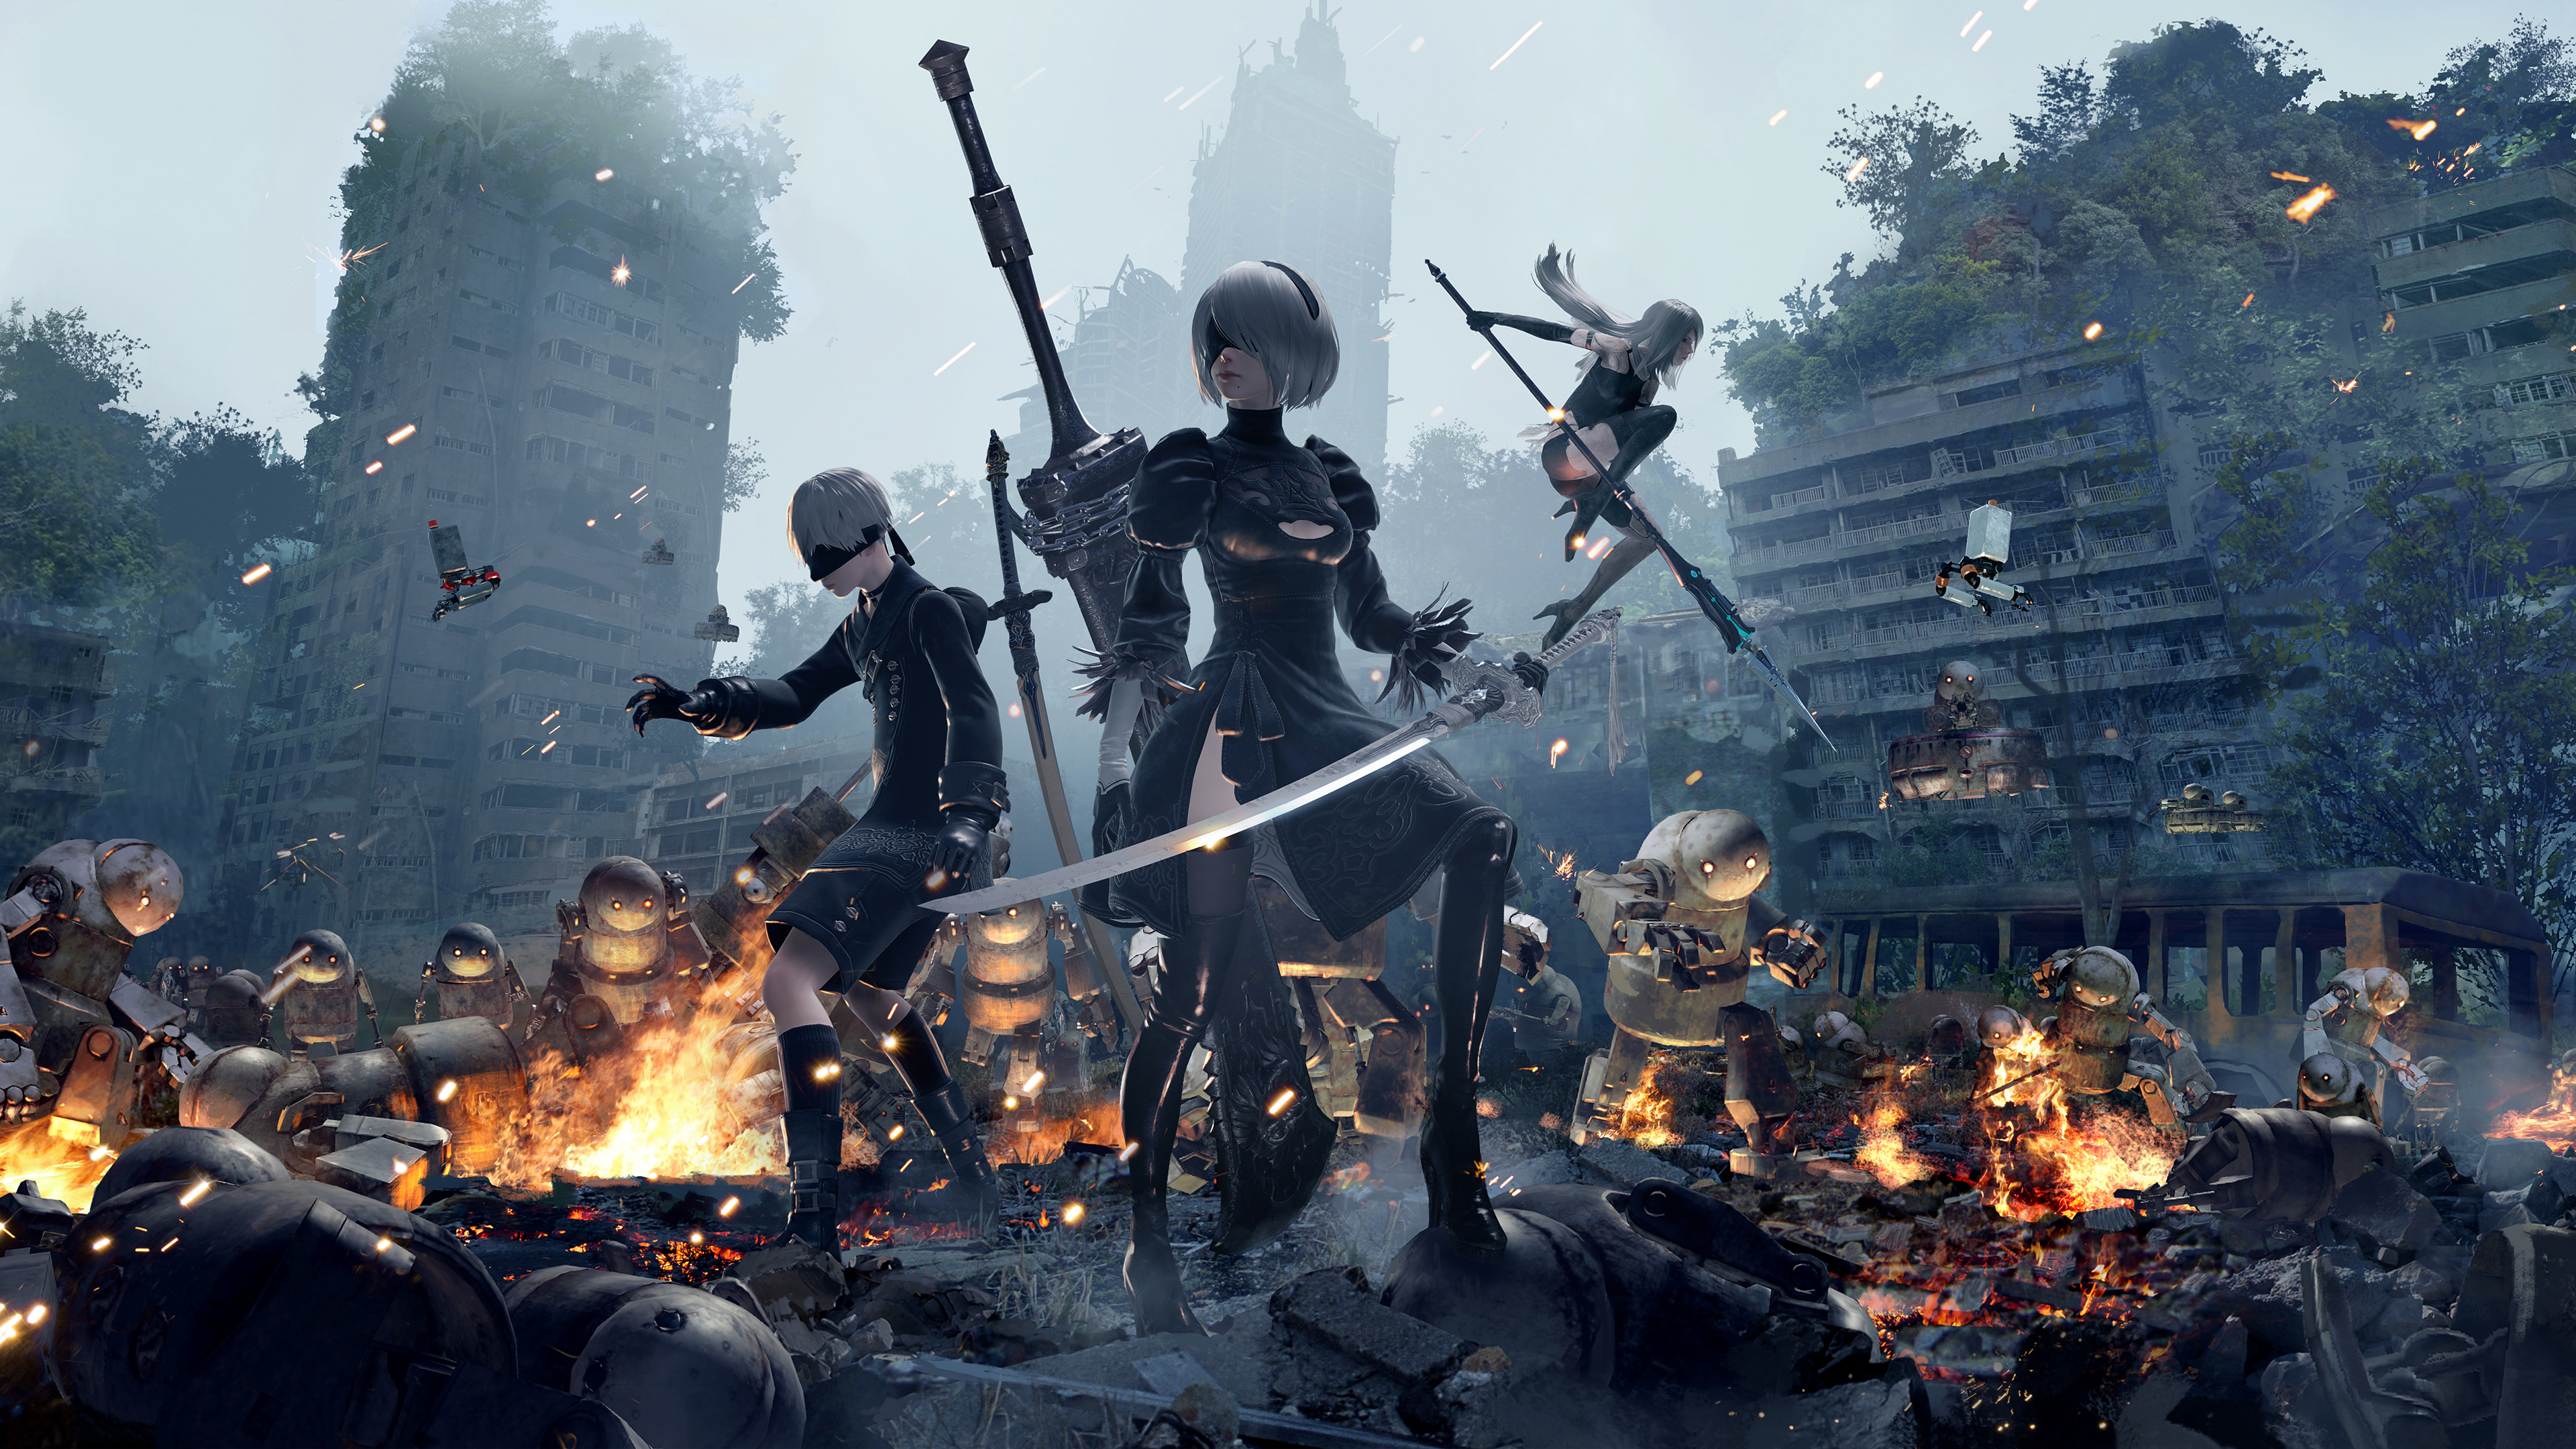 Free Download Wallpaper 4k 9s 2b And Nier Automata 4k 18 Games Wallpapers 3840x2160 For Your Desktop Mobile Tablet Explore 51 Nier Automata Wallpapers Nier Automata Wallpapers Nier